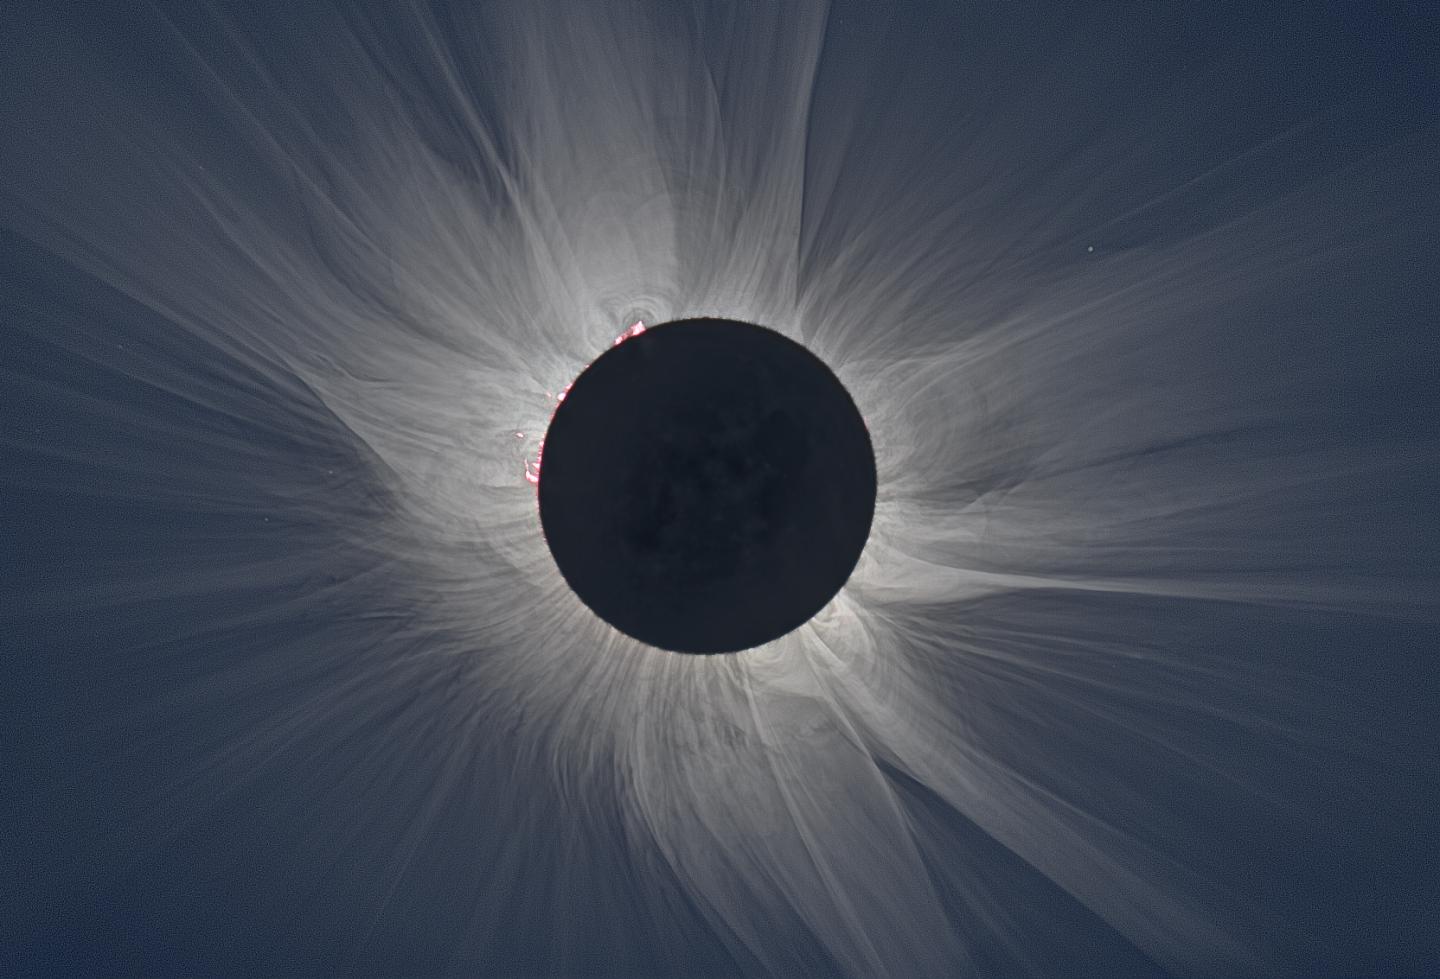 Corona from Svalbard Composed of 29 Eclipse Images